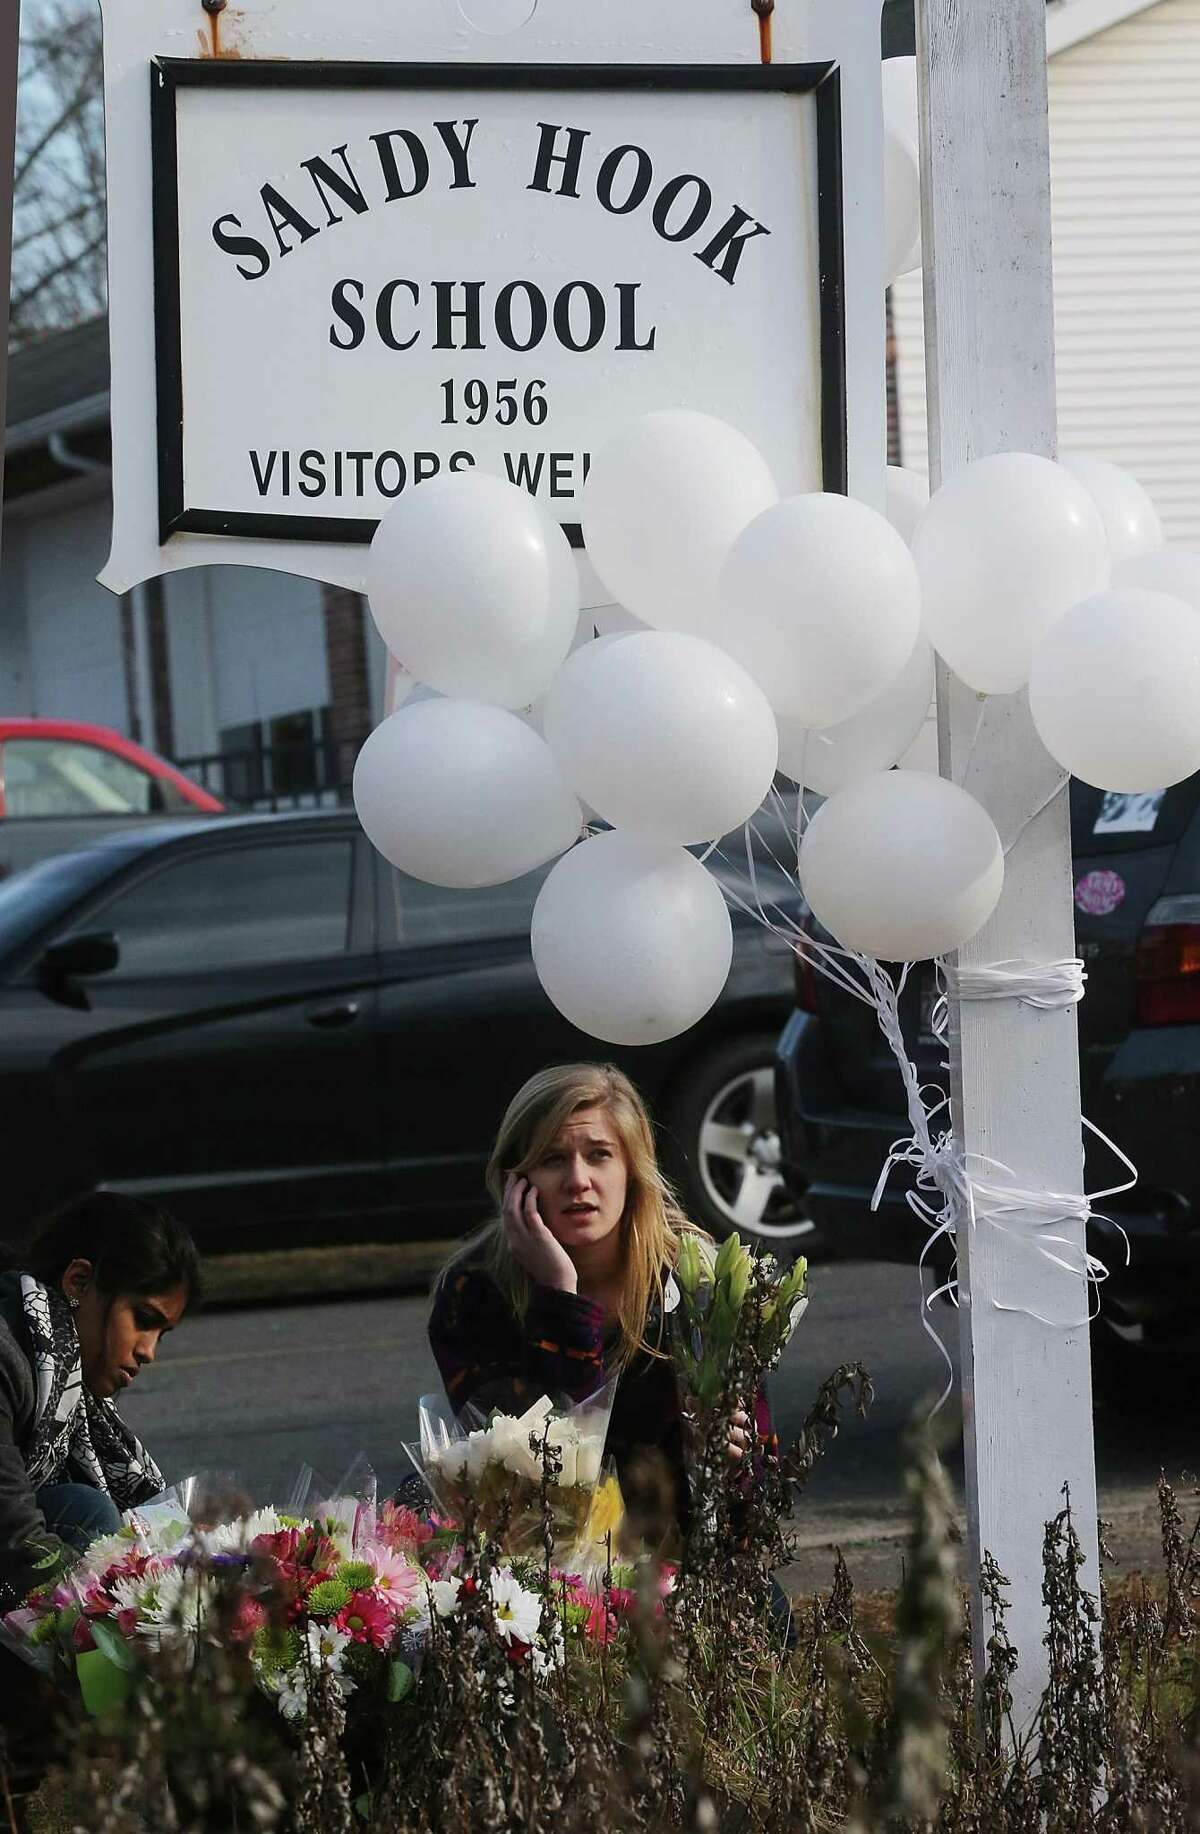 FILE - NOVEMBER 25, 2013: A report will be released today by Connecticut State Attorney Stephen Sedensky III summarizing the December 14, 2012 Newtown school shooting that left 20 children and six women dead inside Sandy Hook Elementary School November 25, 2013. NEWTOWN, CT - DECEMBER 15: People gather at a makeshift memorial outside a firehouse which was used as a staging area for families following the mass shooting at Sandy Hook Elementary School on December 15, 2012 in Newtown, Connecticut. Twenty six people were shot dead, including twenty children, after a gunman identified as Adam Lanza in news reports opened fire in the school. Lanza also reportedly had committed suicide at the scene. (Photo by Mario Tama/Getty Images)